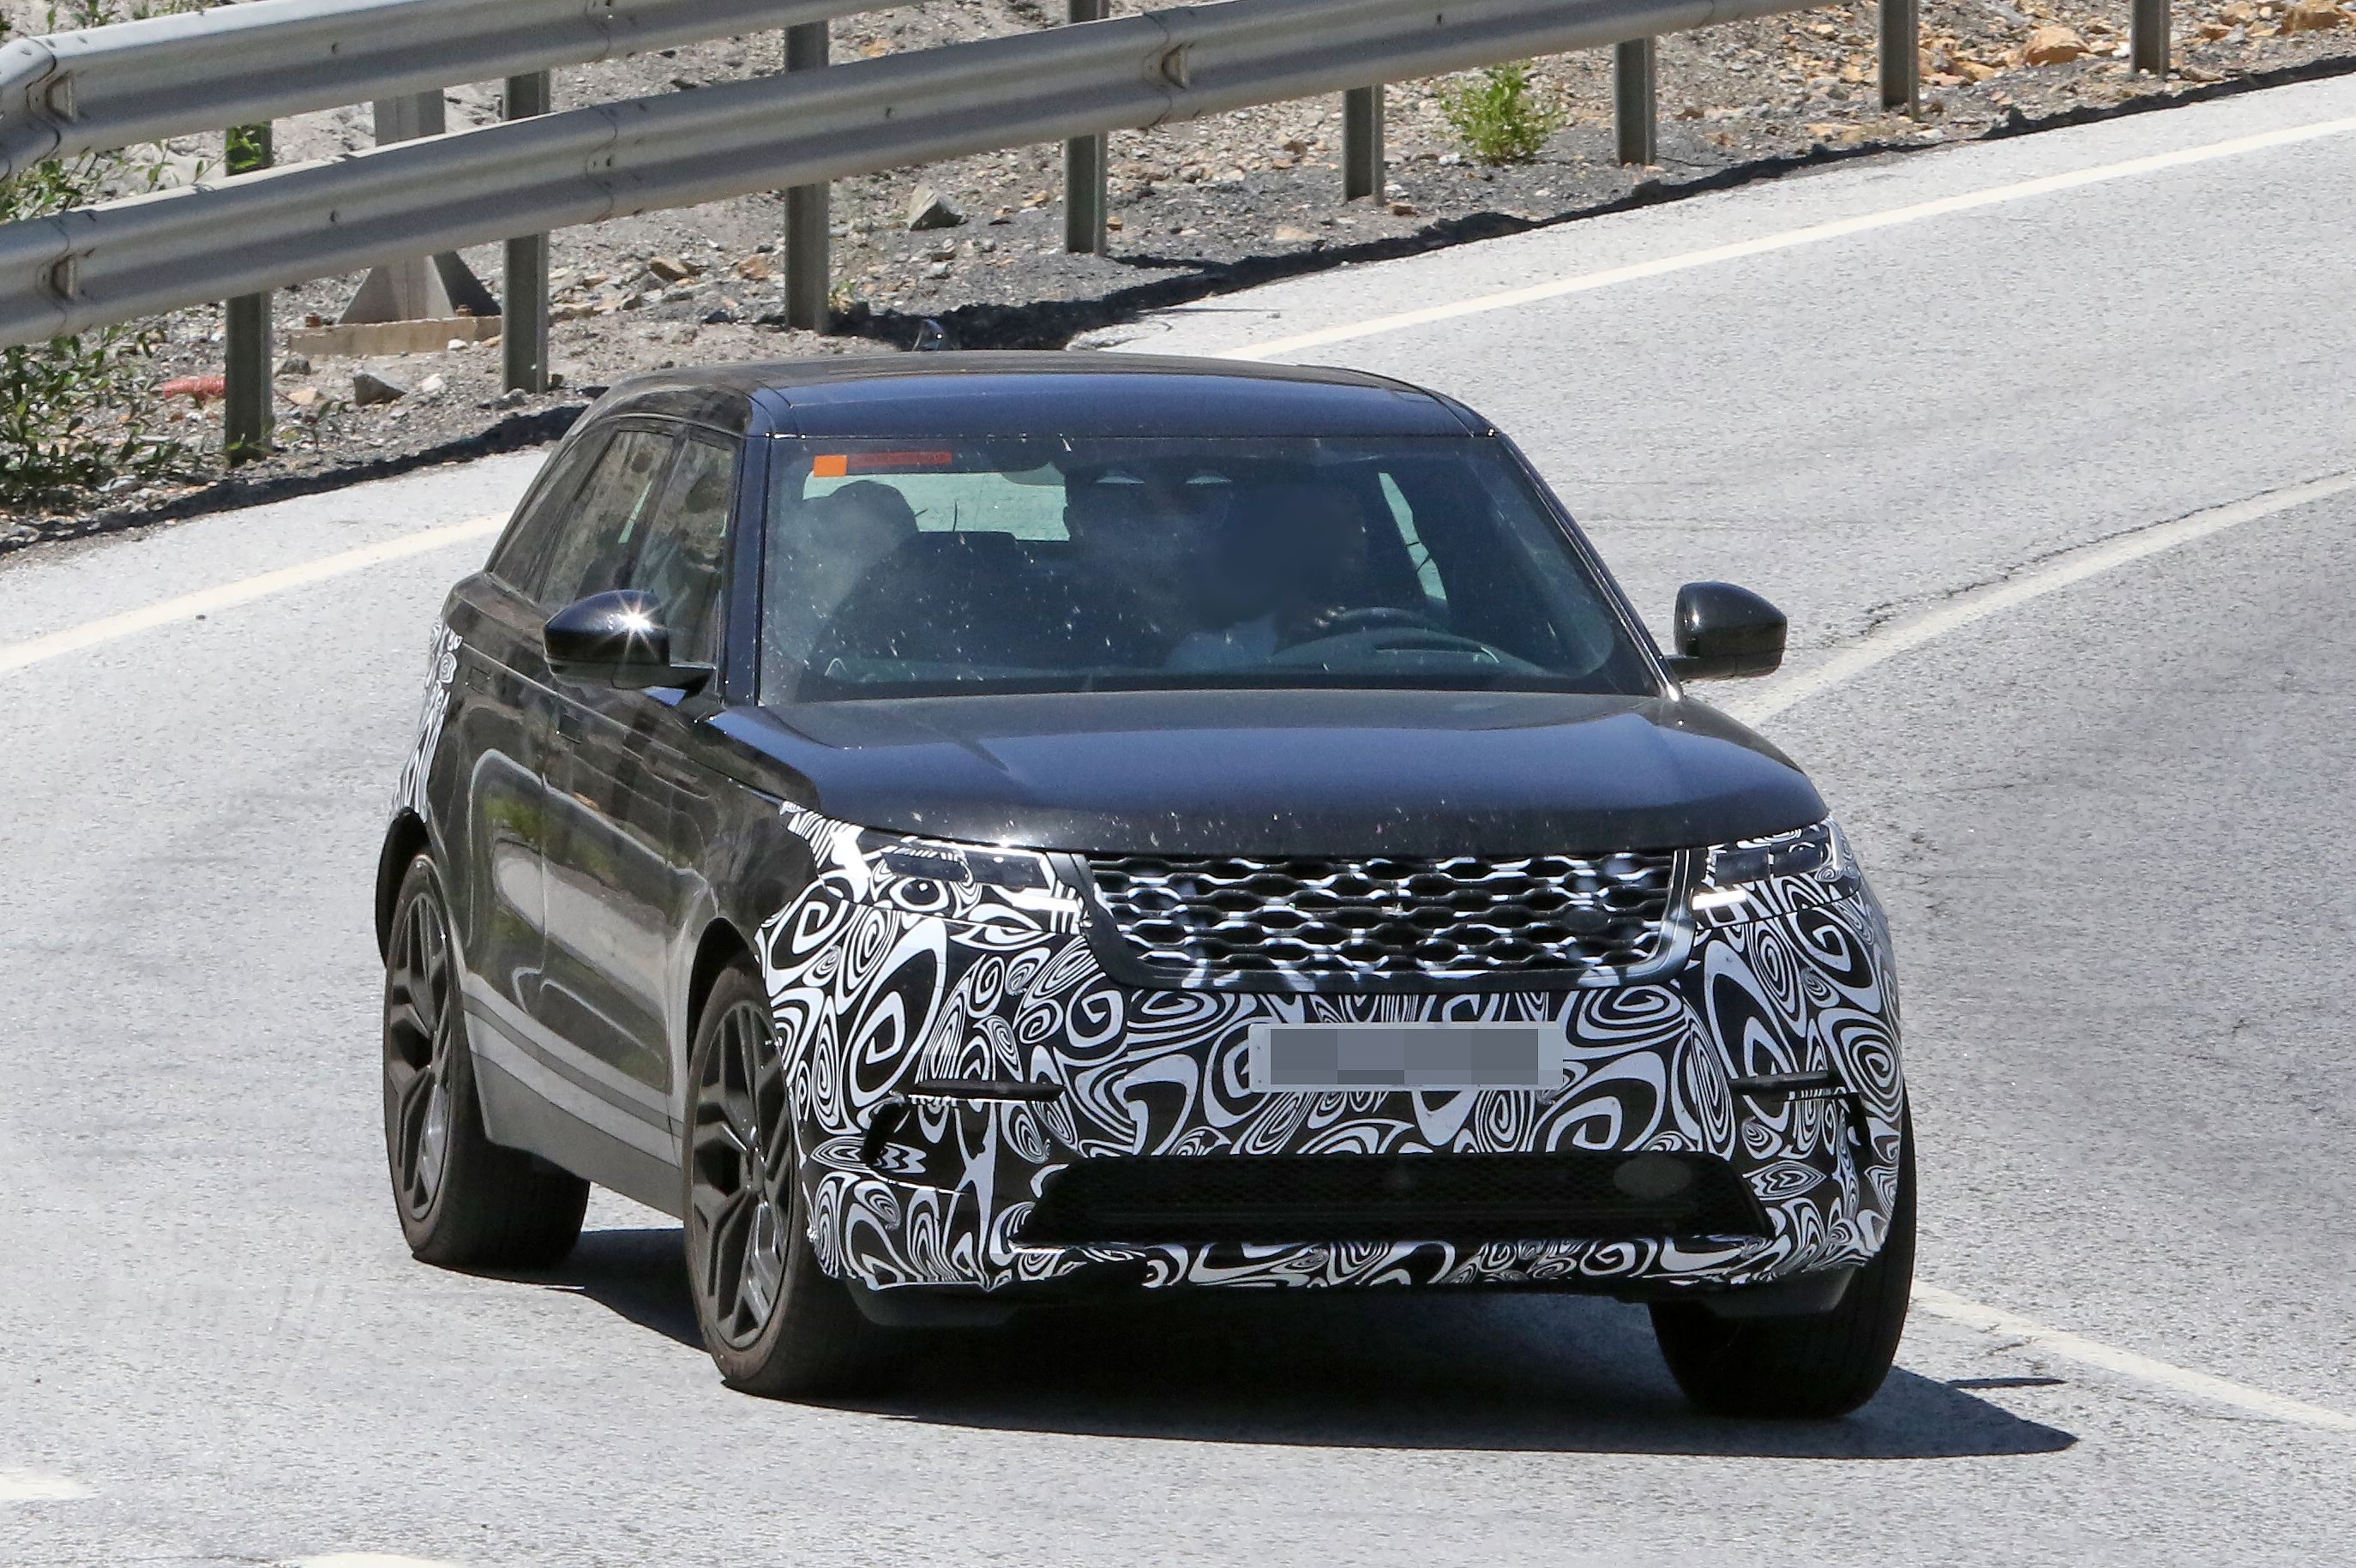 Land Rover Range Rover Velar Is About To Receive a Well-Deserved